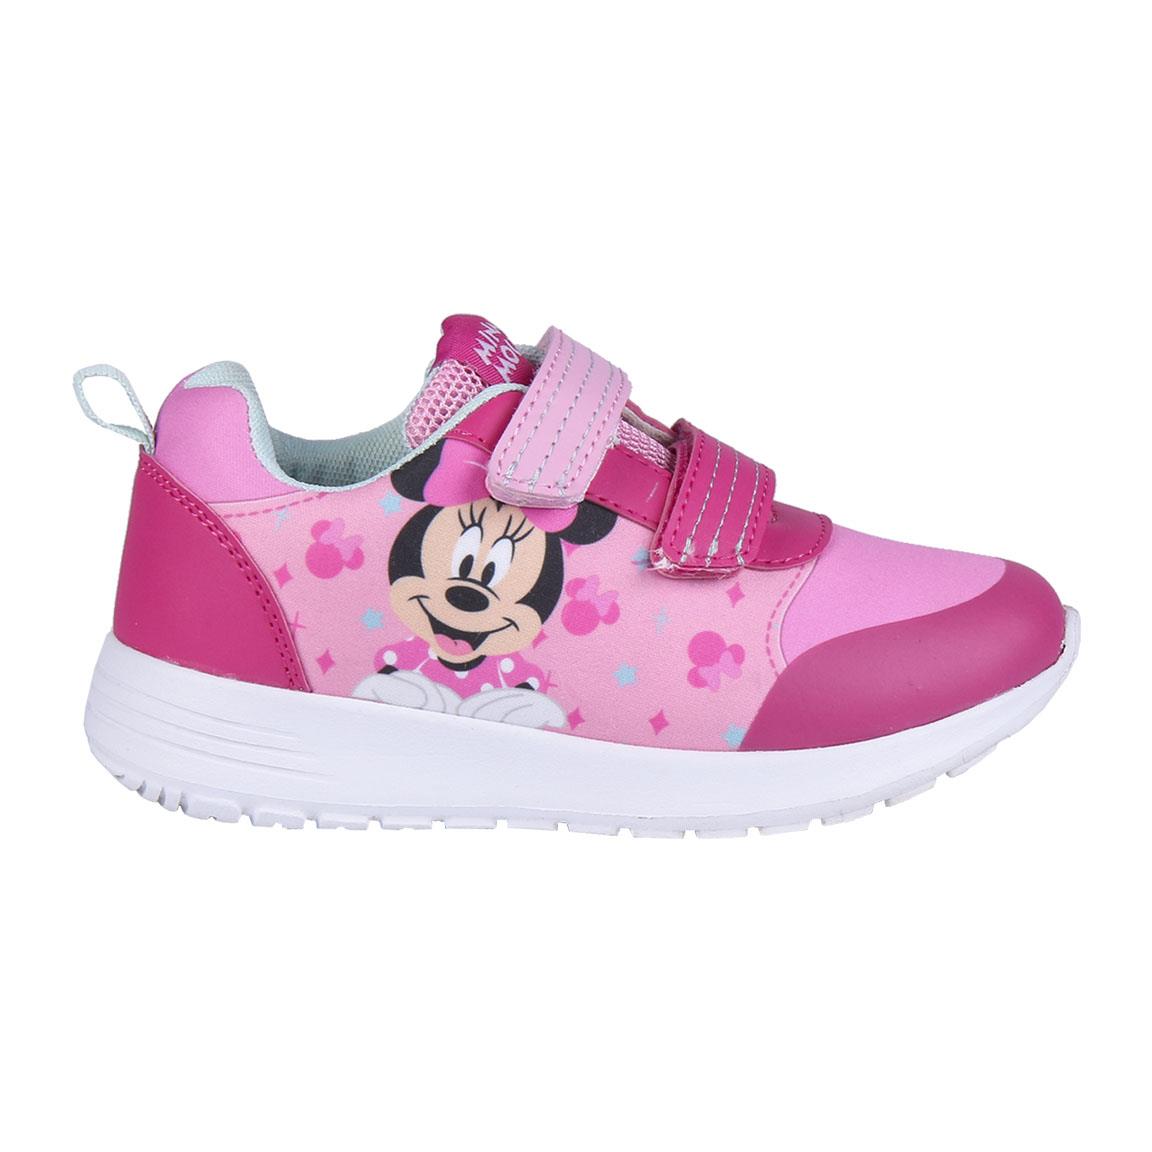 SPORTY SHOES LIGHT EVA SOLE POLYESTER MINNIE